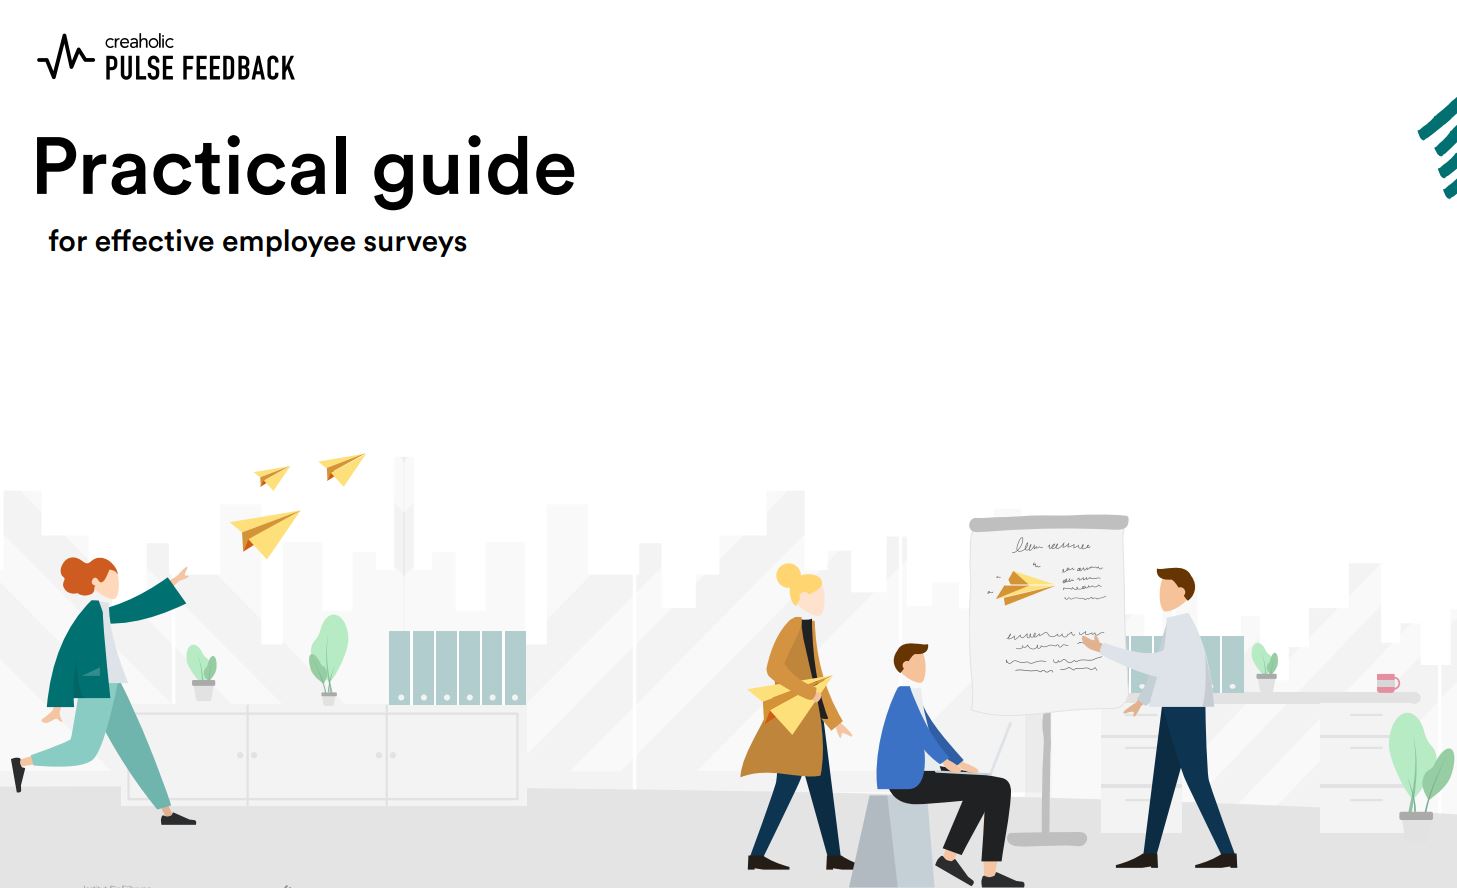 Whitepaper Cover. On the left there is a woman with orange hair and a green jacket. On the right there are three people discussing at a flipchart.